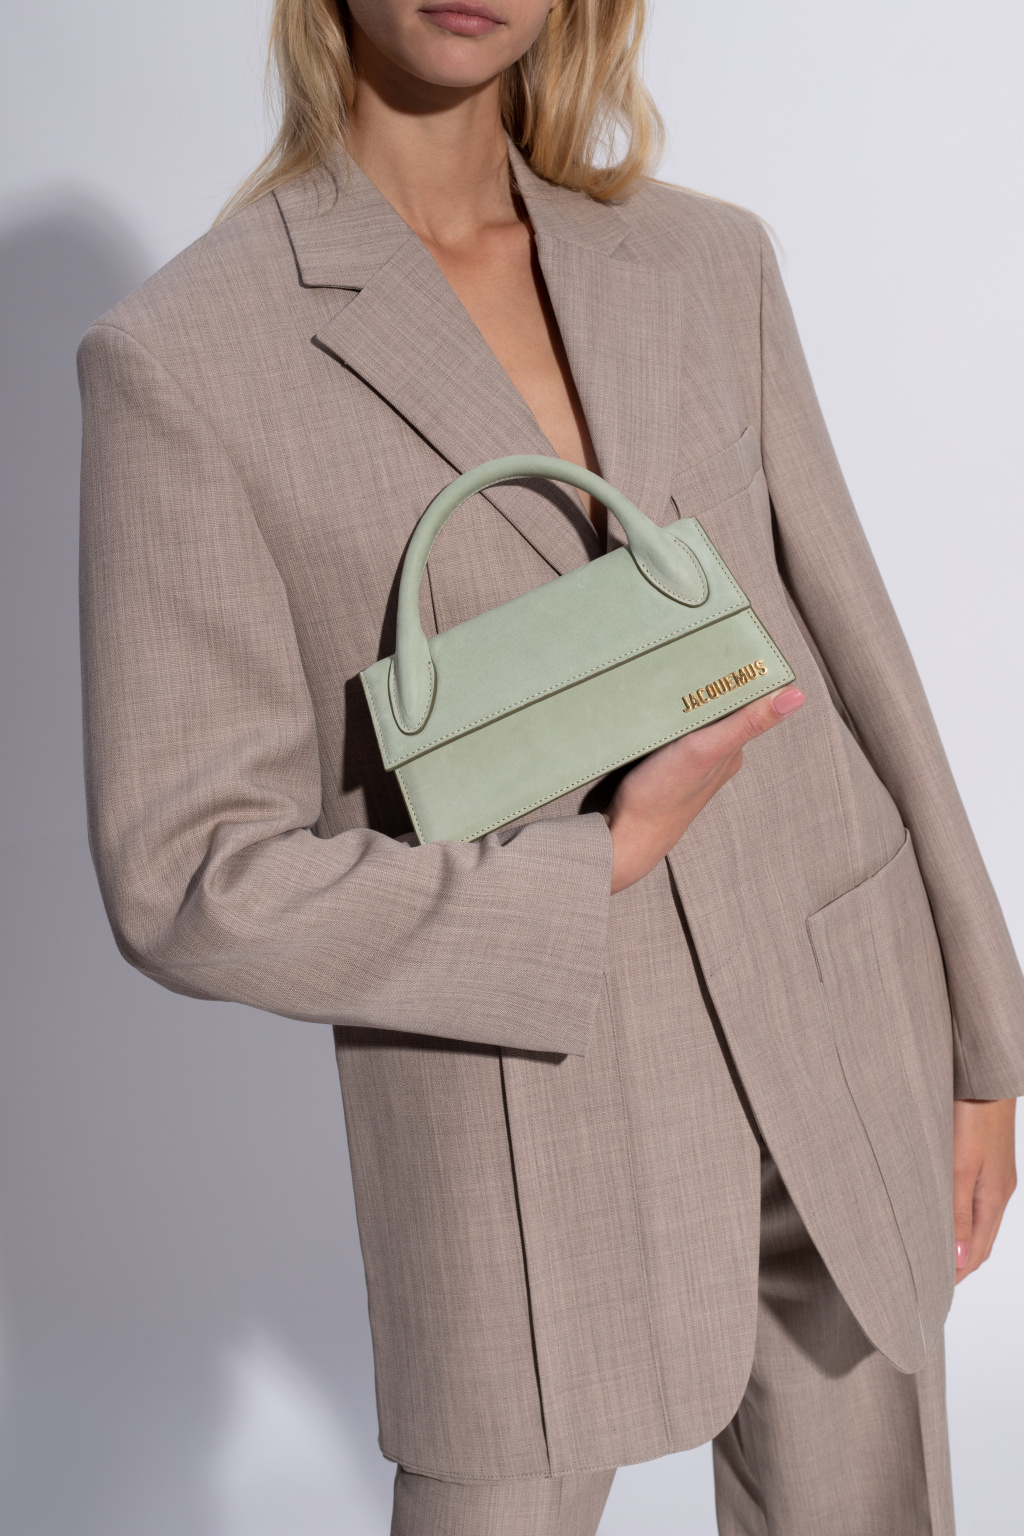 Jacquemus Le Chiquito Long Leather Tote in Green